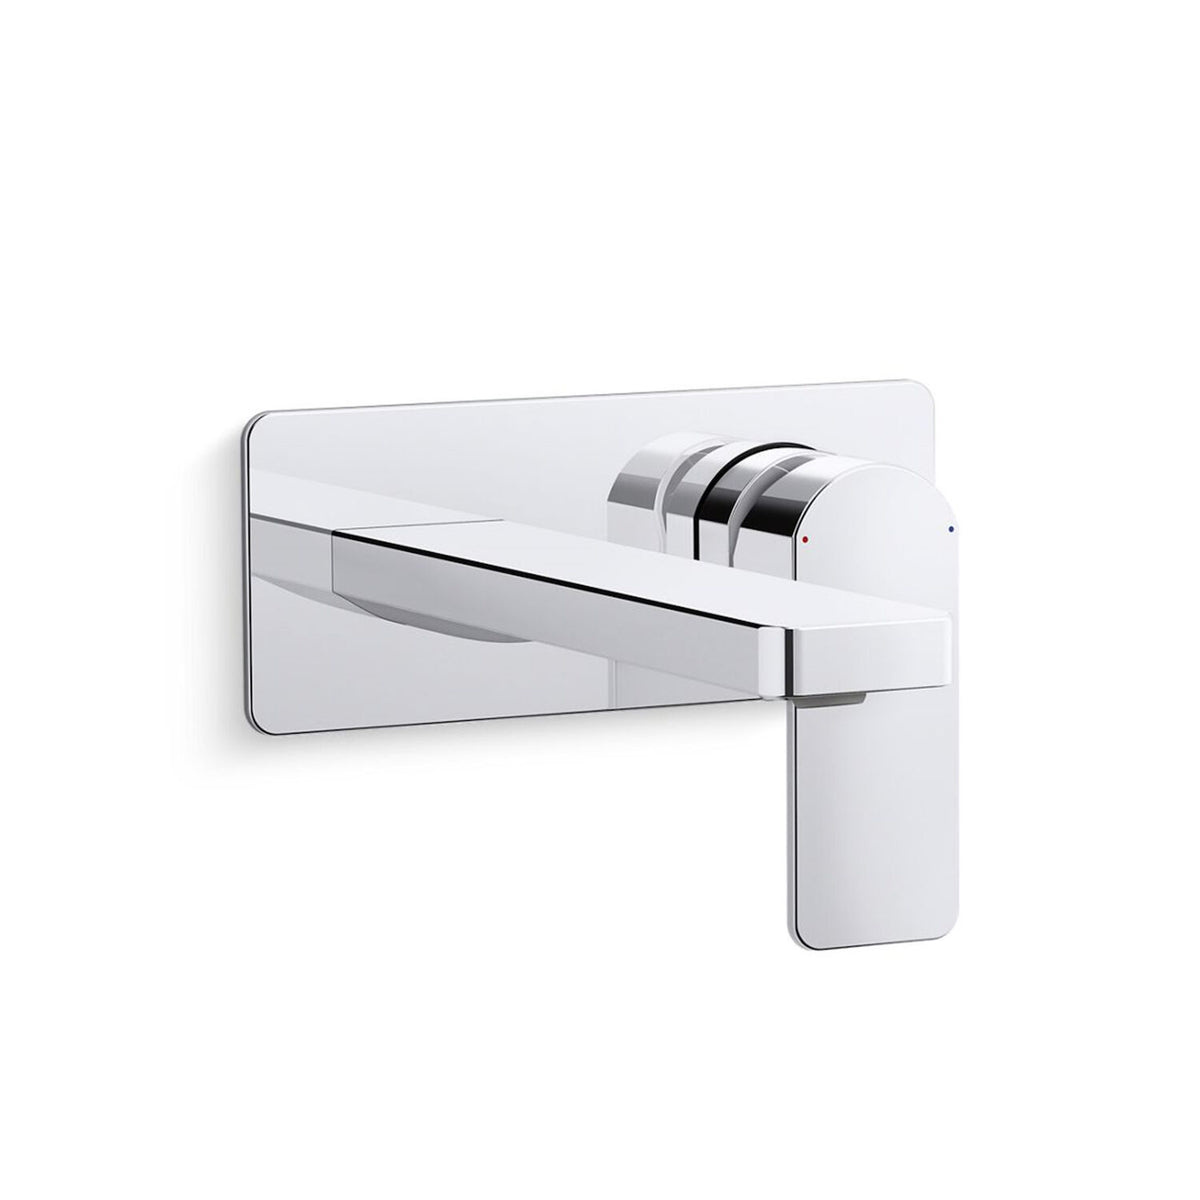 PARALLEL WALL-MOUNT SINGLE-HANDLE BATHROOM SINK FAUCET, 1.2 GPM